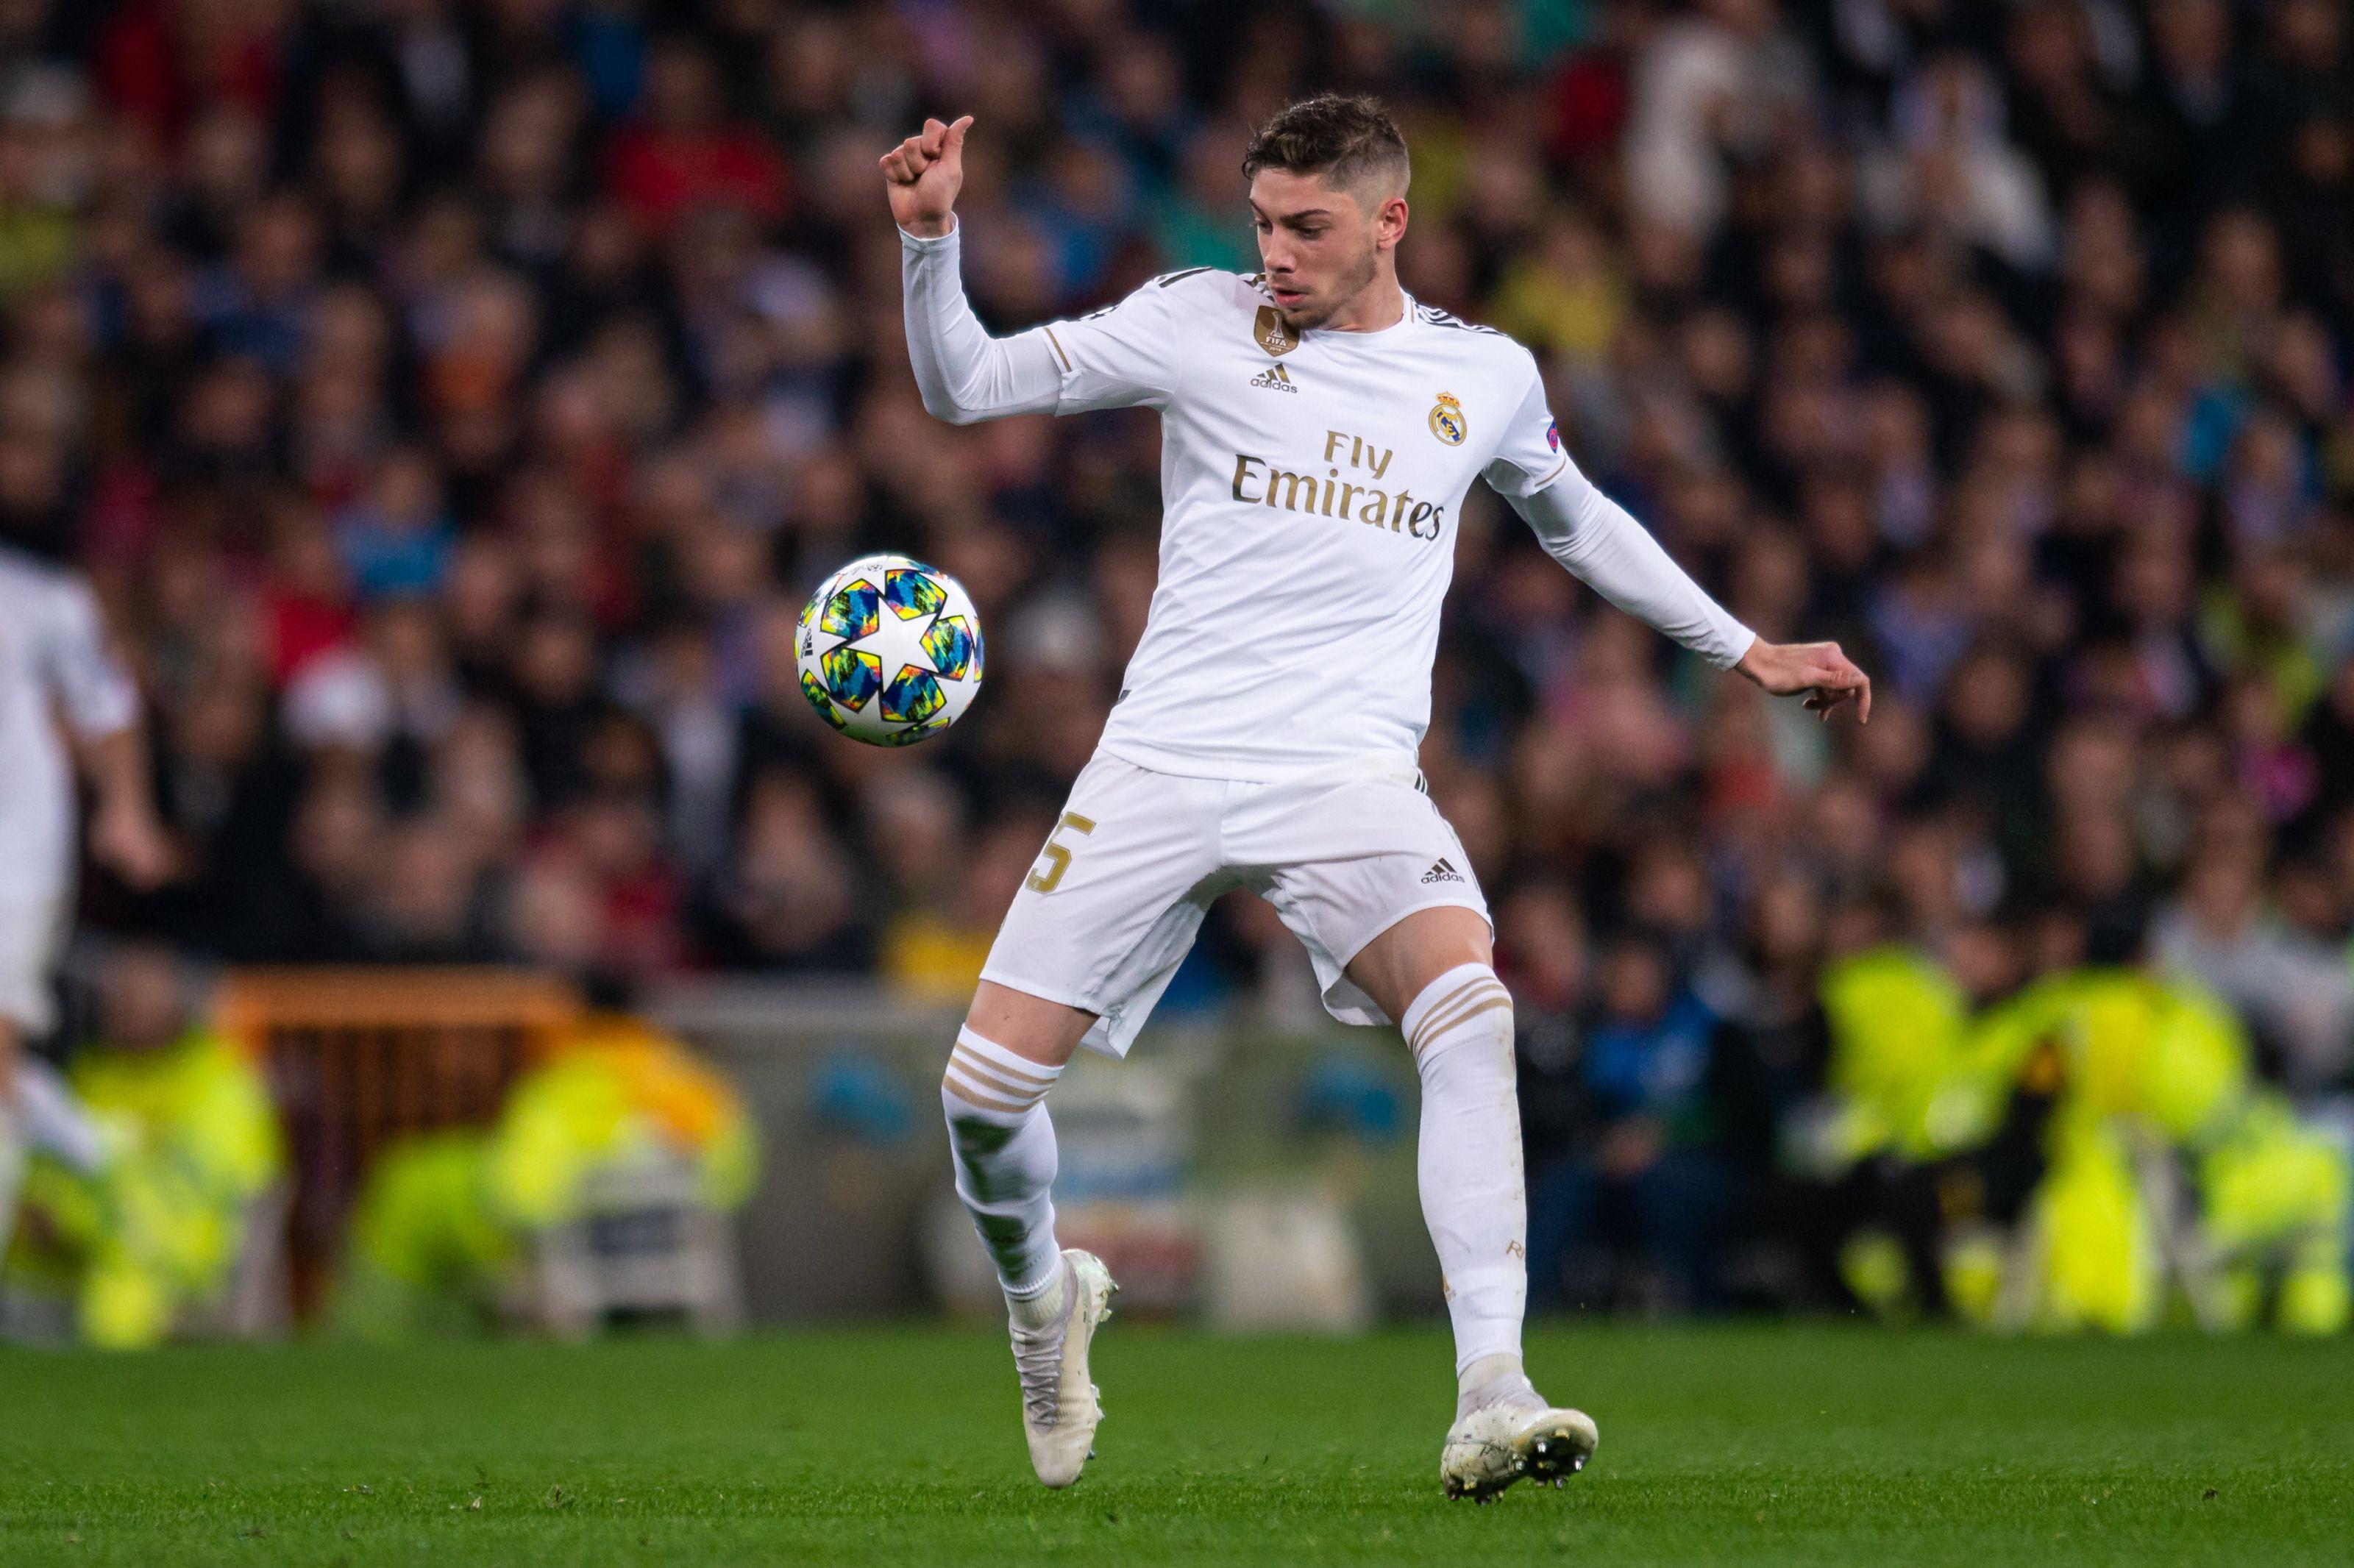 Real Madrid wisely extend breakout star midfielder